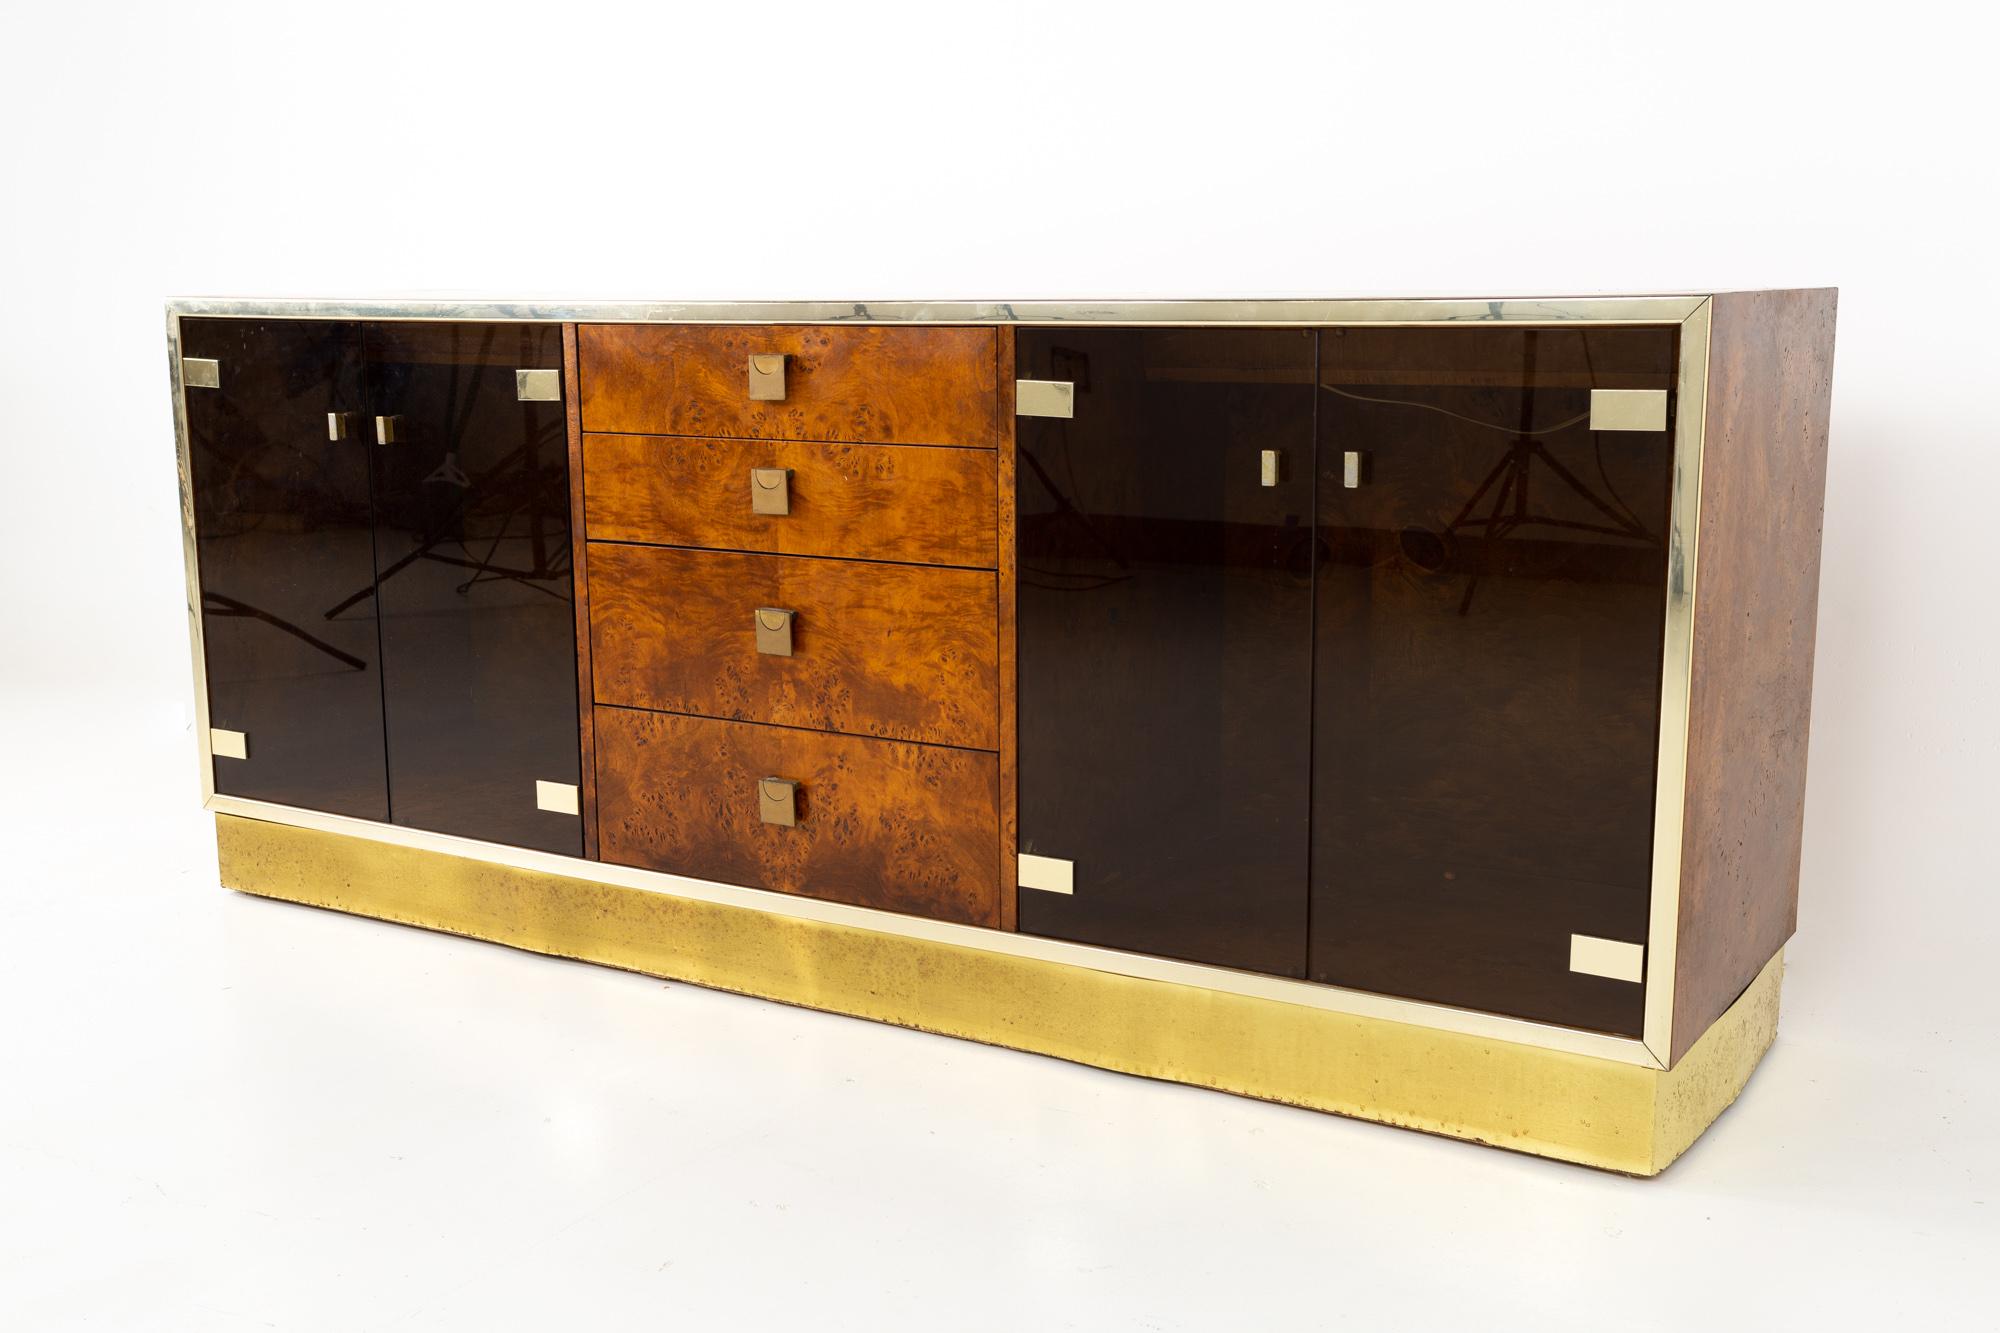 Milo Baughman style founders mid century burlwood brass chrome and glass sideboard credenza
This sideboard credenza is 72 wide x 18 deep x 29.25 inches high

All pieces of furniture can be had in what we call restored vintage condition. That